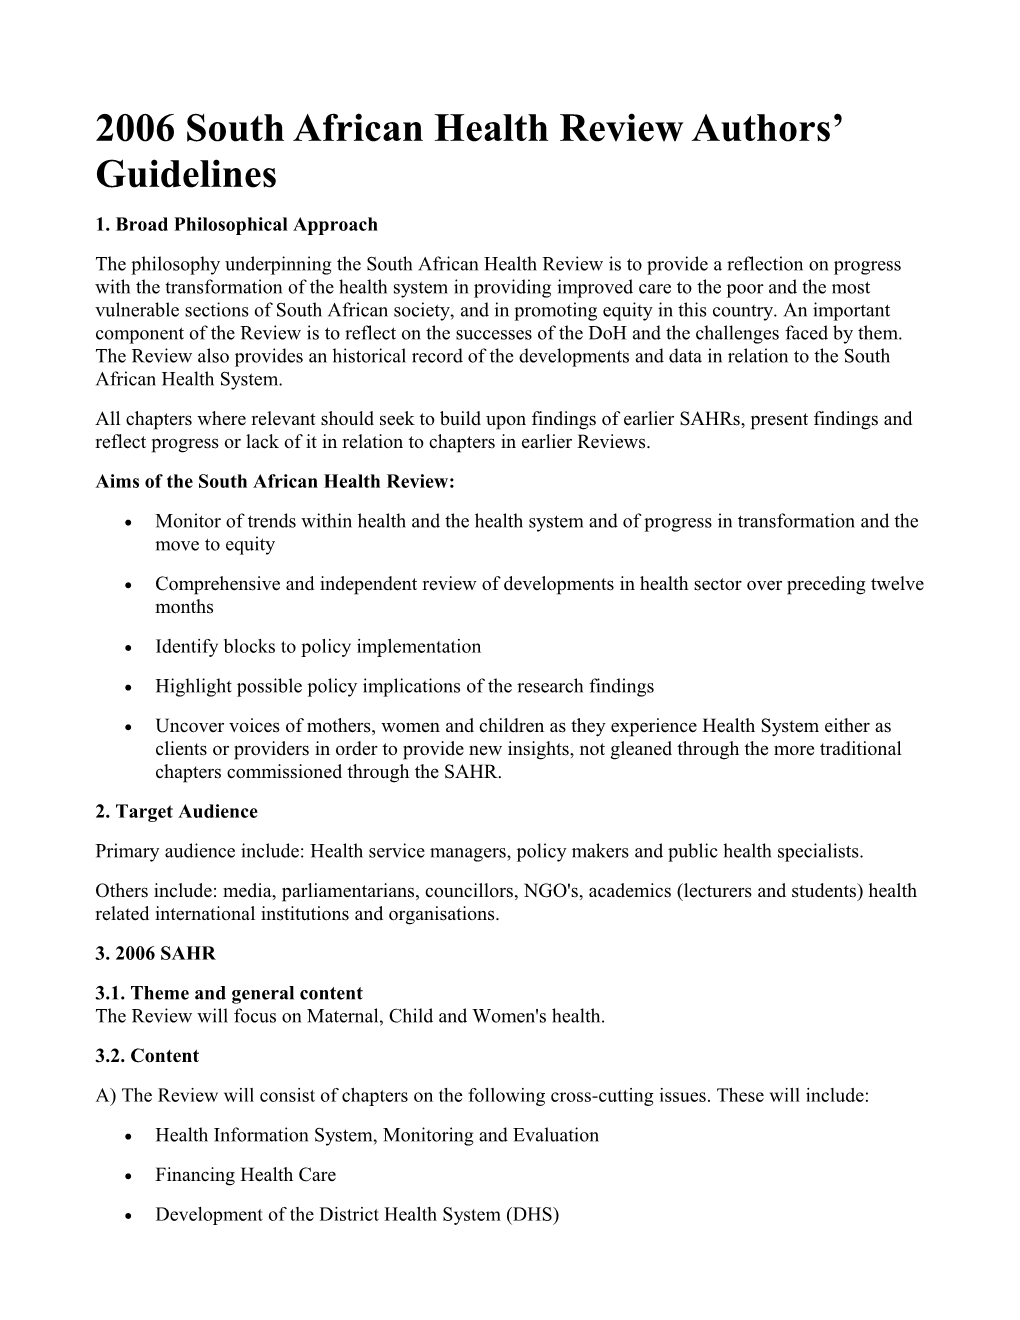 2006 South African Health Review Authors Guidelines